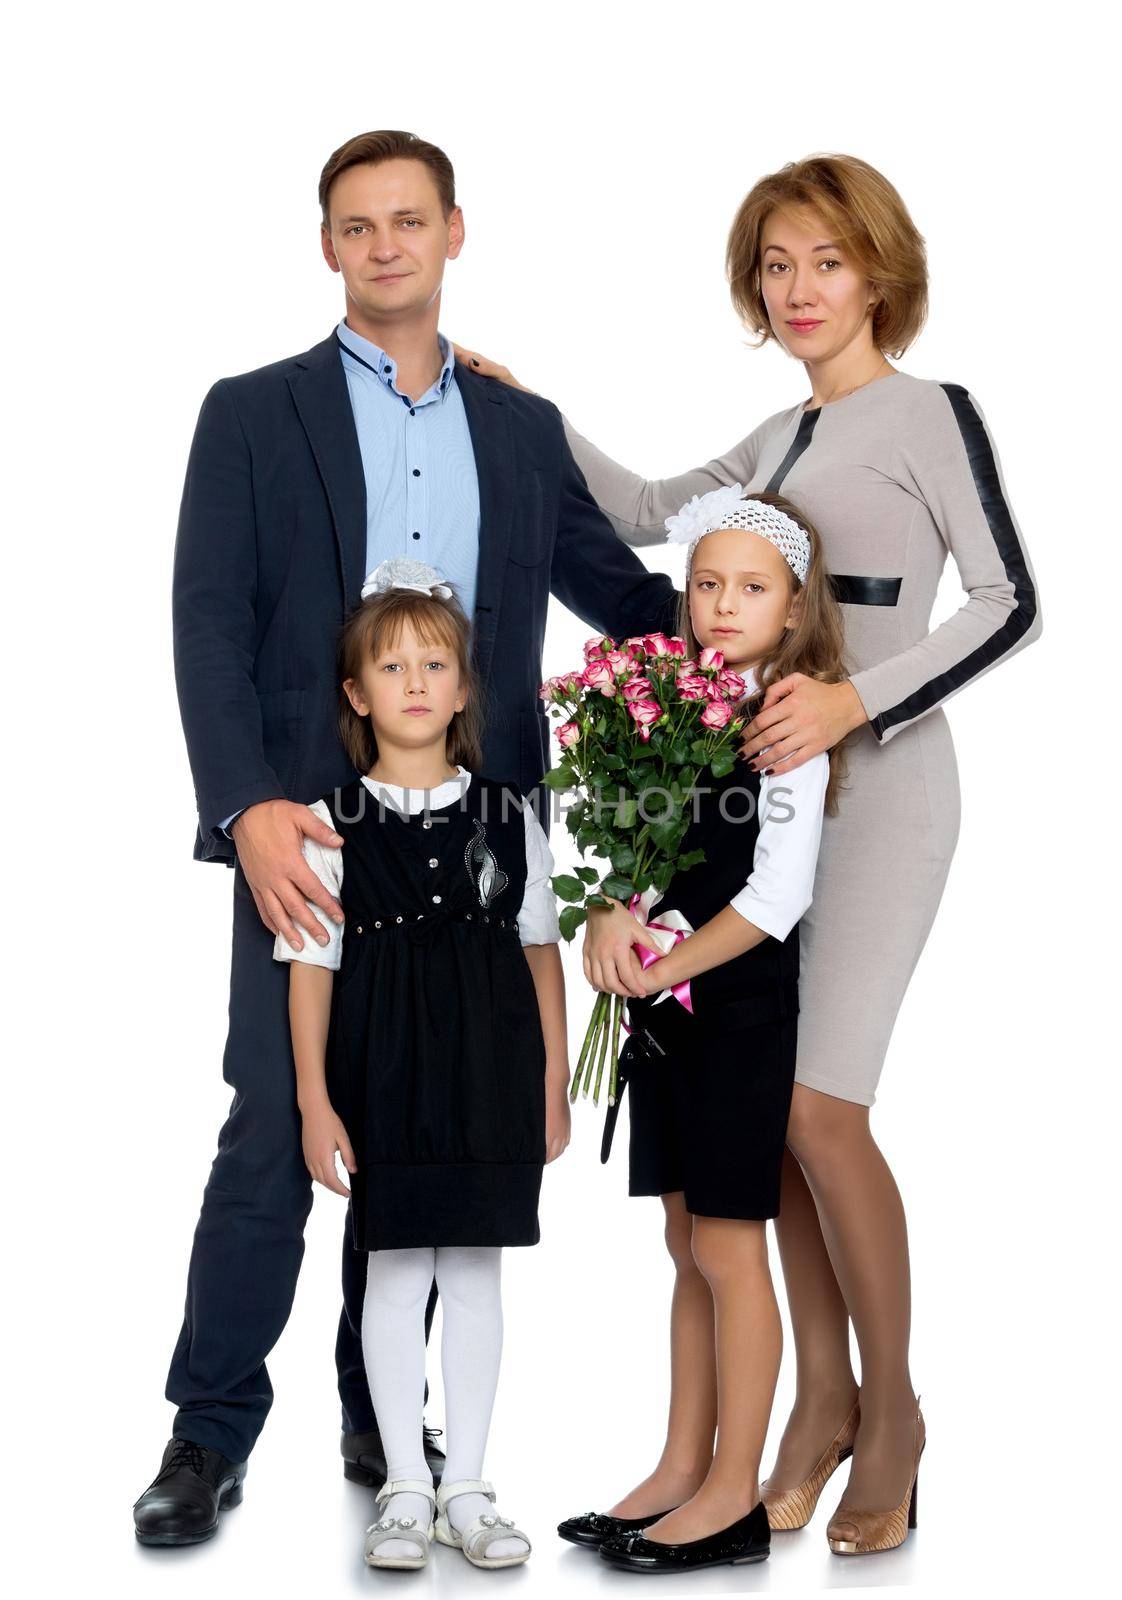 Family portrait of 4 people. Parents with two adorable school-age girls , with a bouquet of roses - Isolated on white background